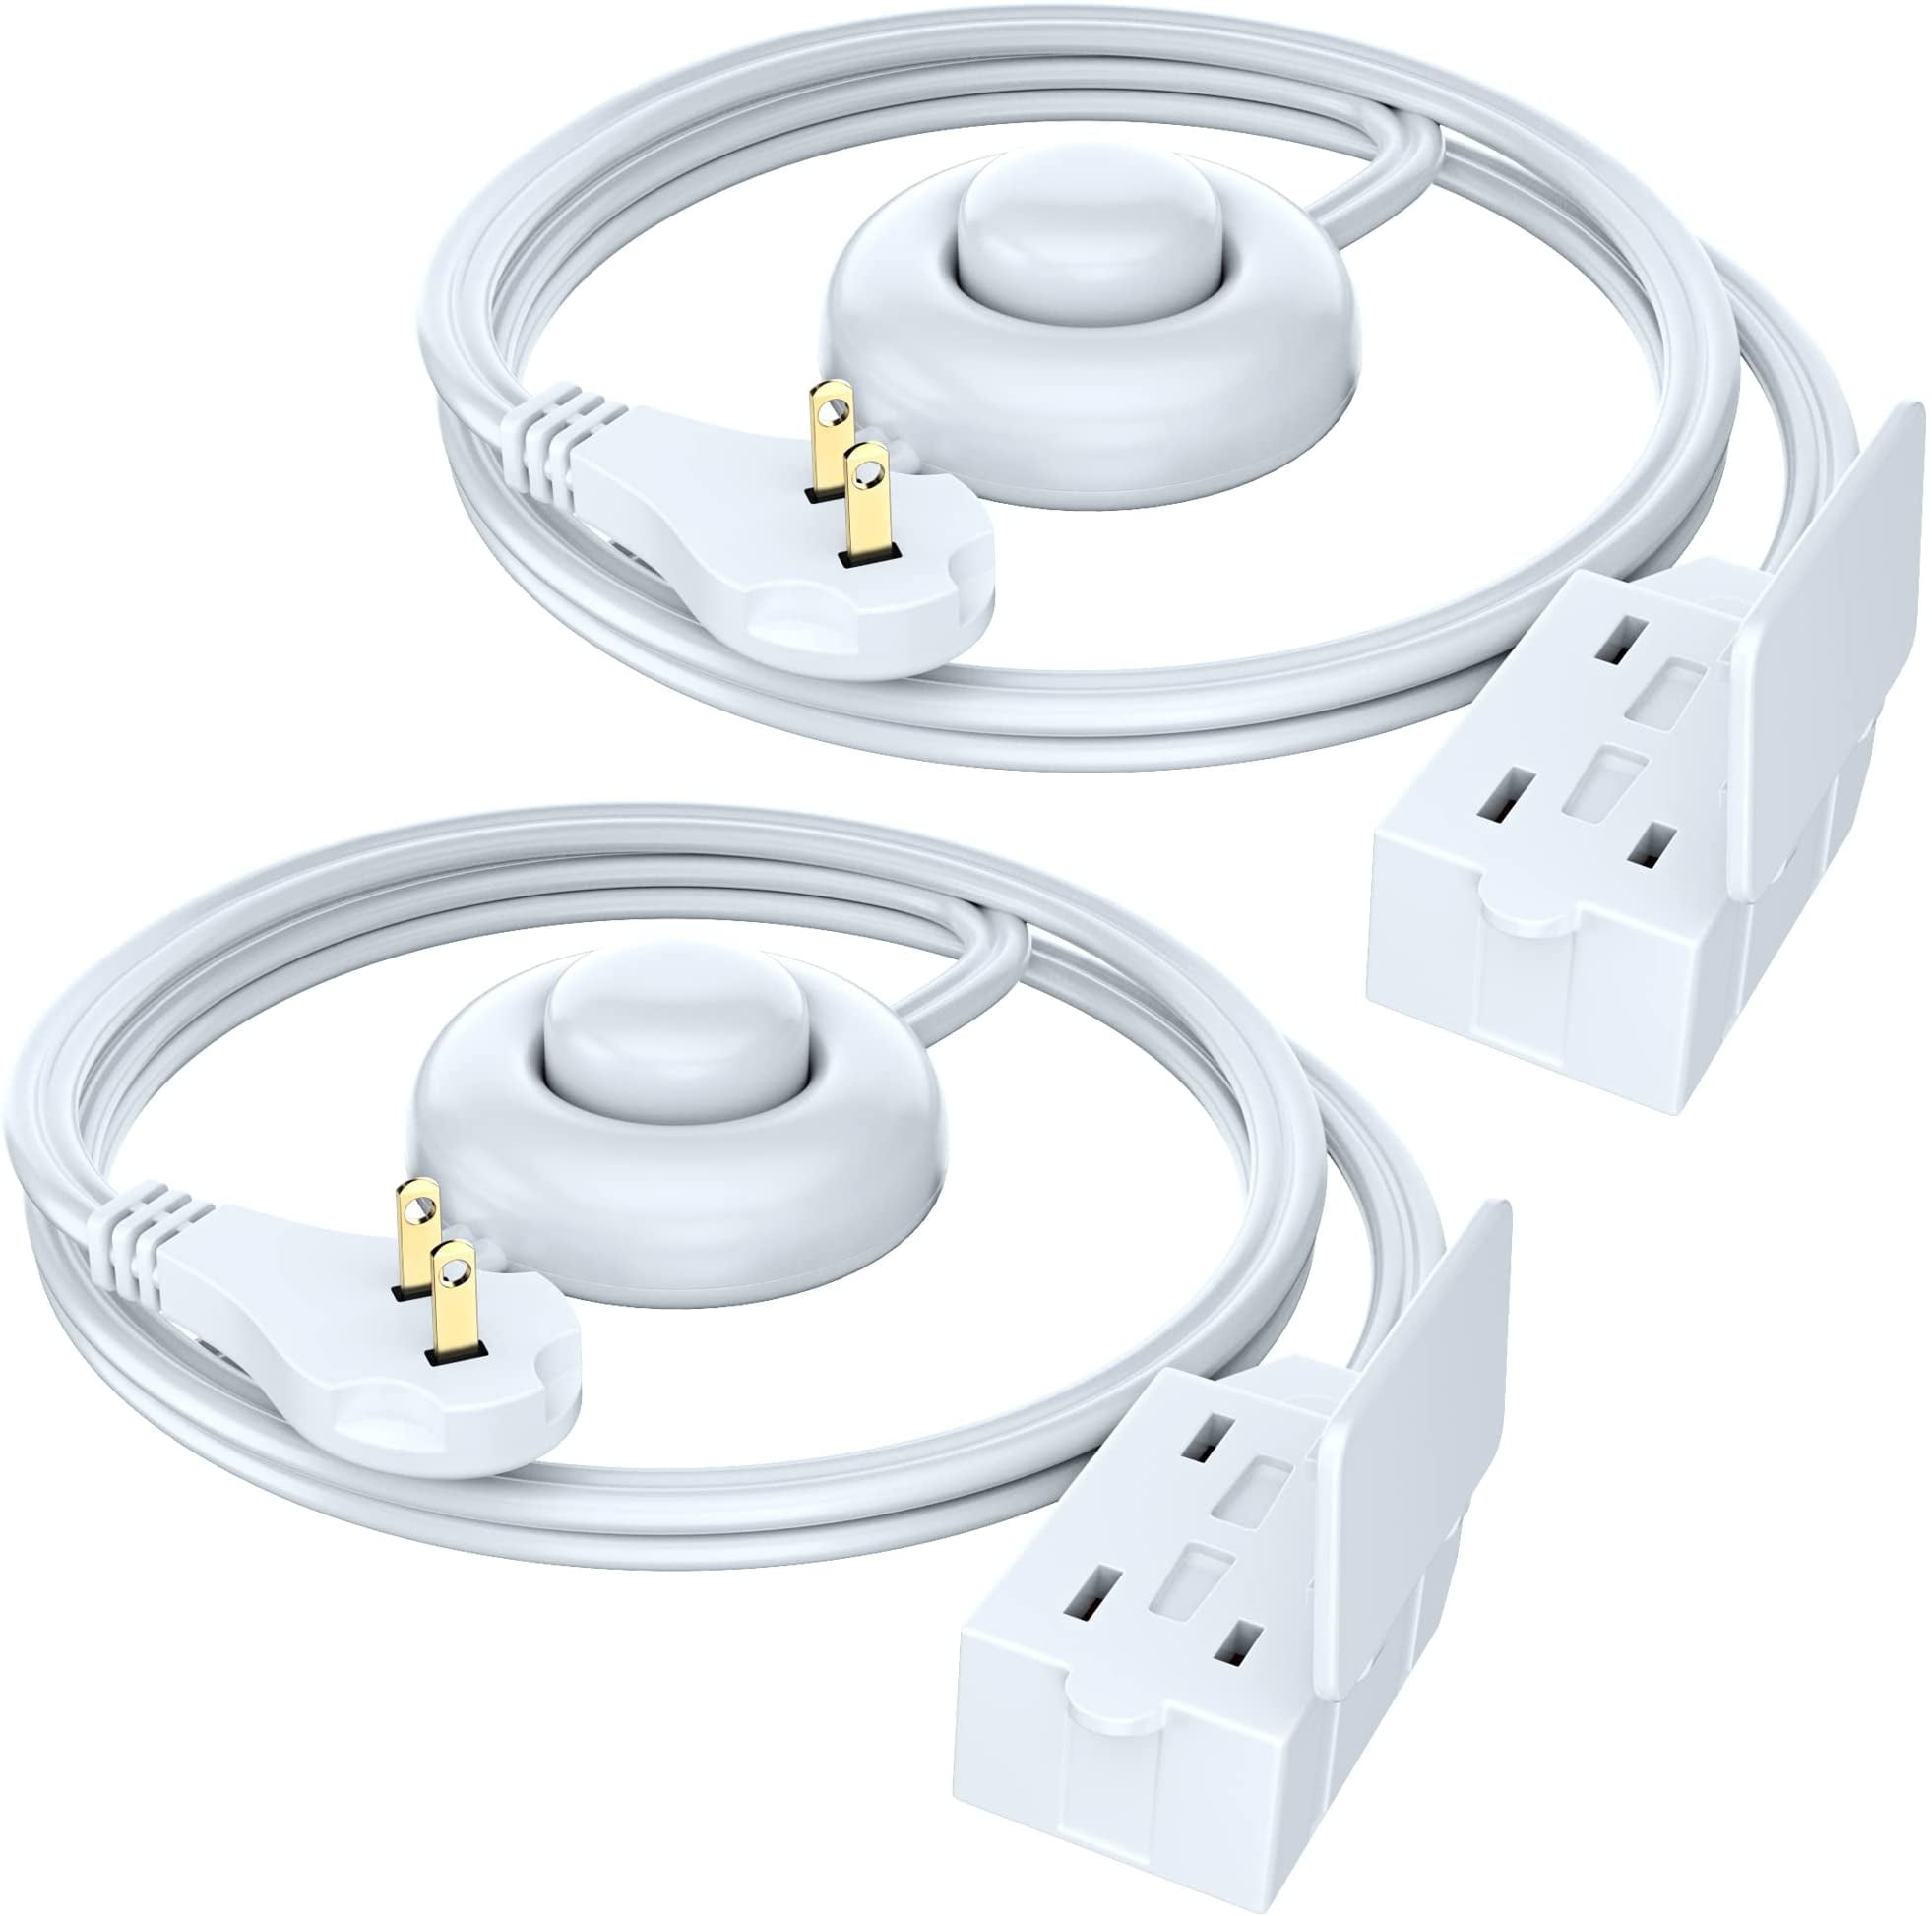 Twin Extension Cord Power Strip - 12 Foot Cord - 6 Feet on Each Side - Flat Head (Wall Hugger) Outlet Plug - 6 Polarized Outlets with Safety Cover